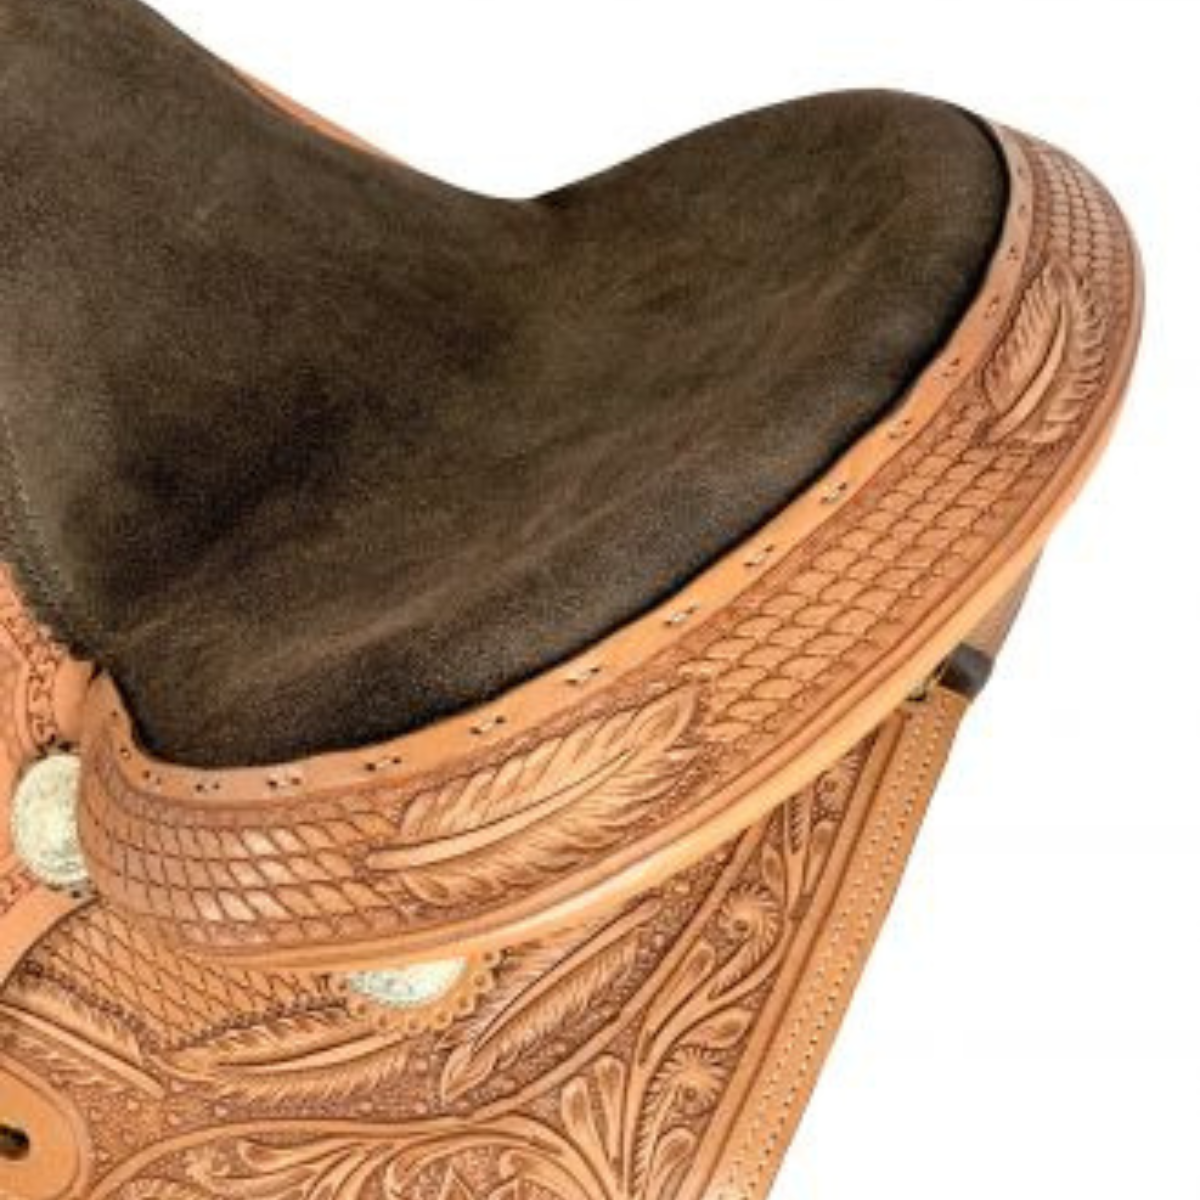 16" Double T combo basketweave/floral tooling Barrel Saddle Set with Brown Suede Seat - Double T Saddles